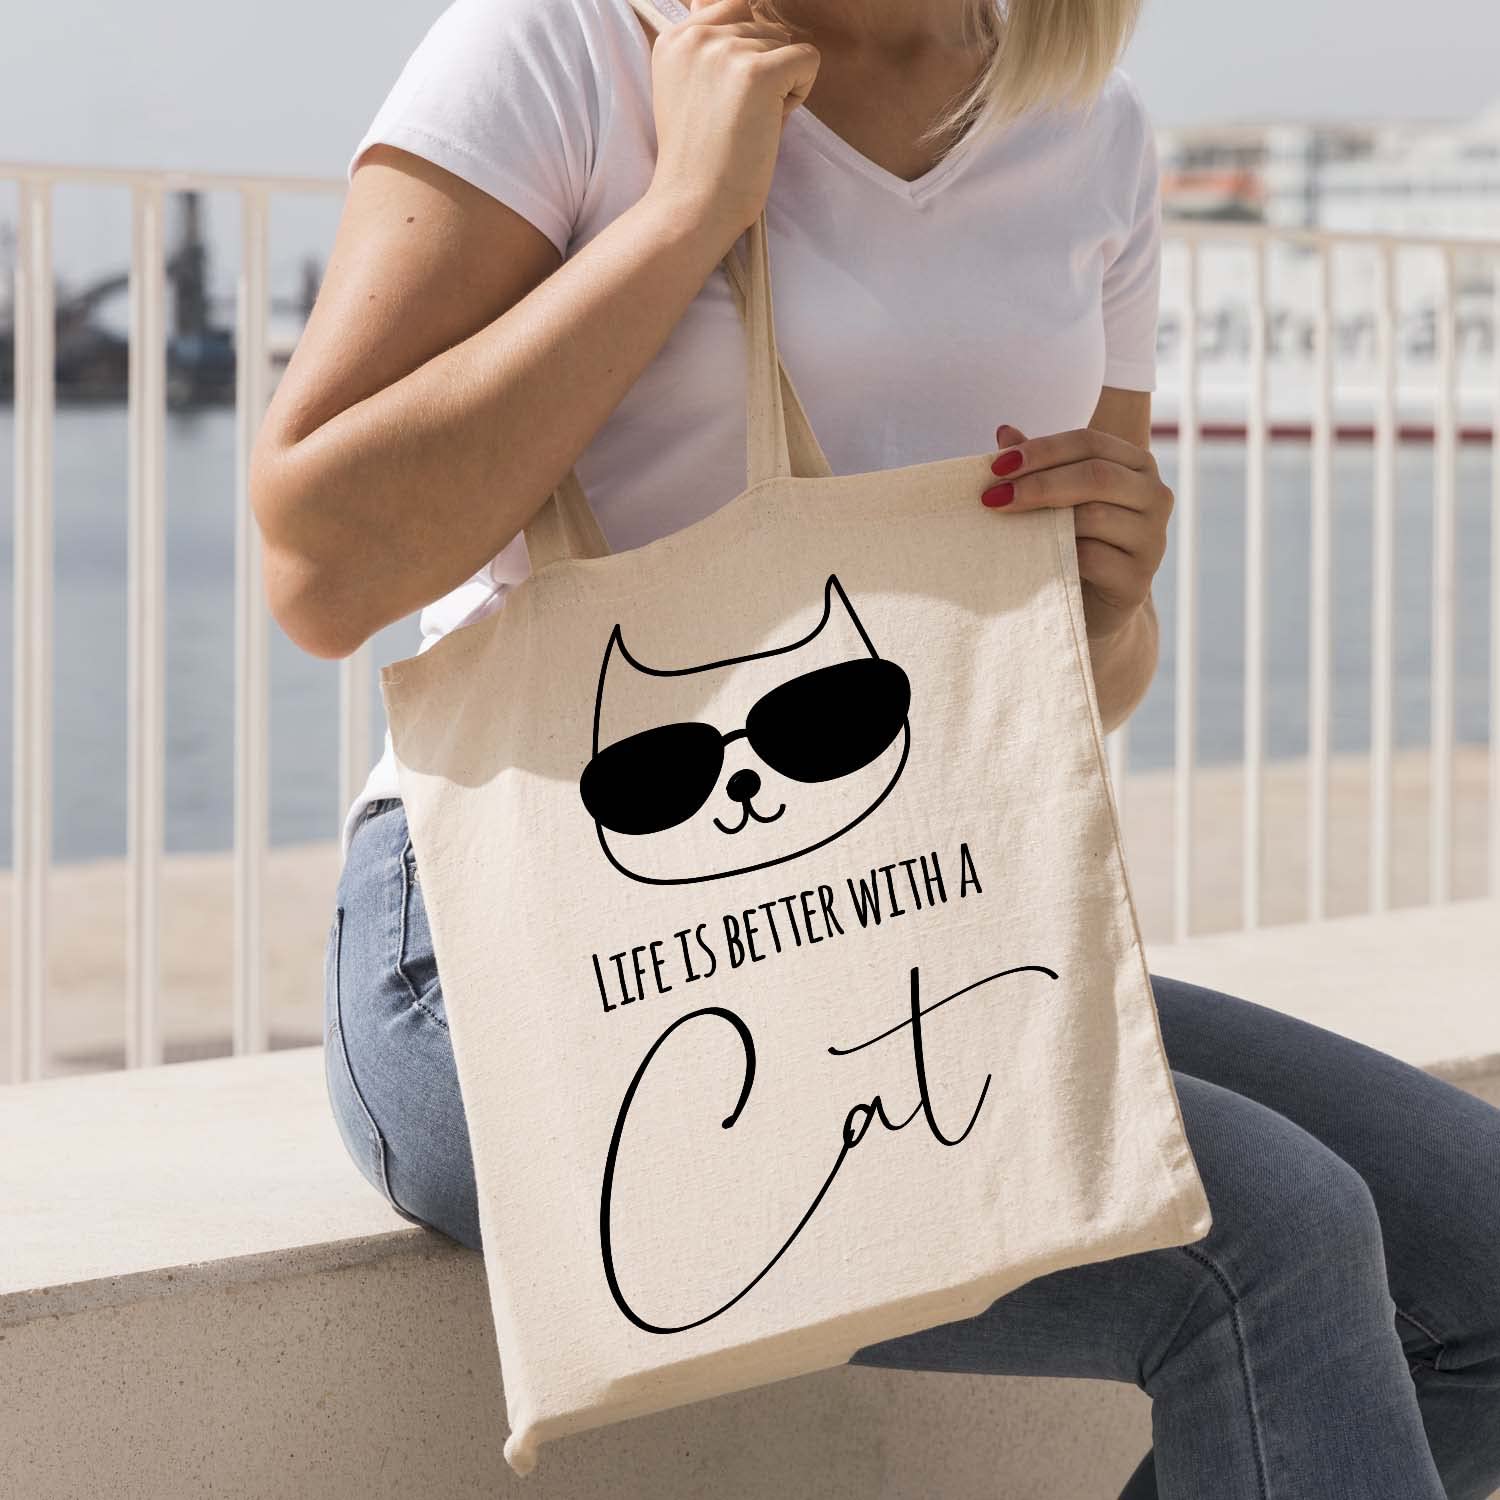 The 10 best freelance bag & tote designers for hire in 2023 - 99designs